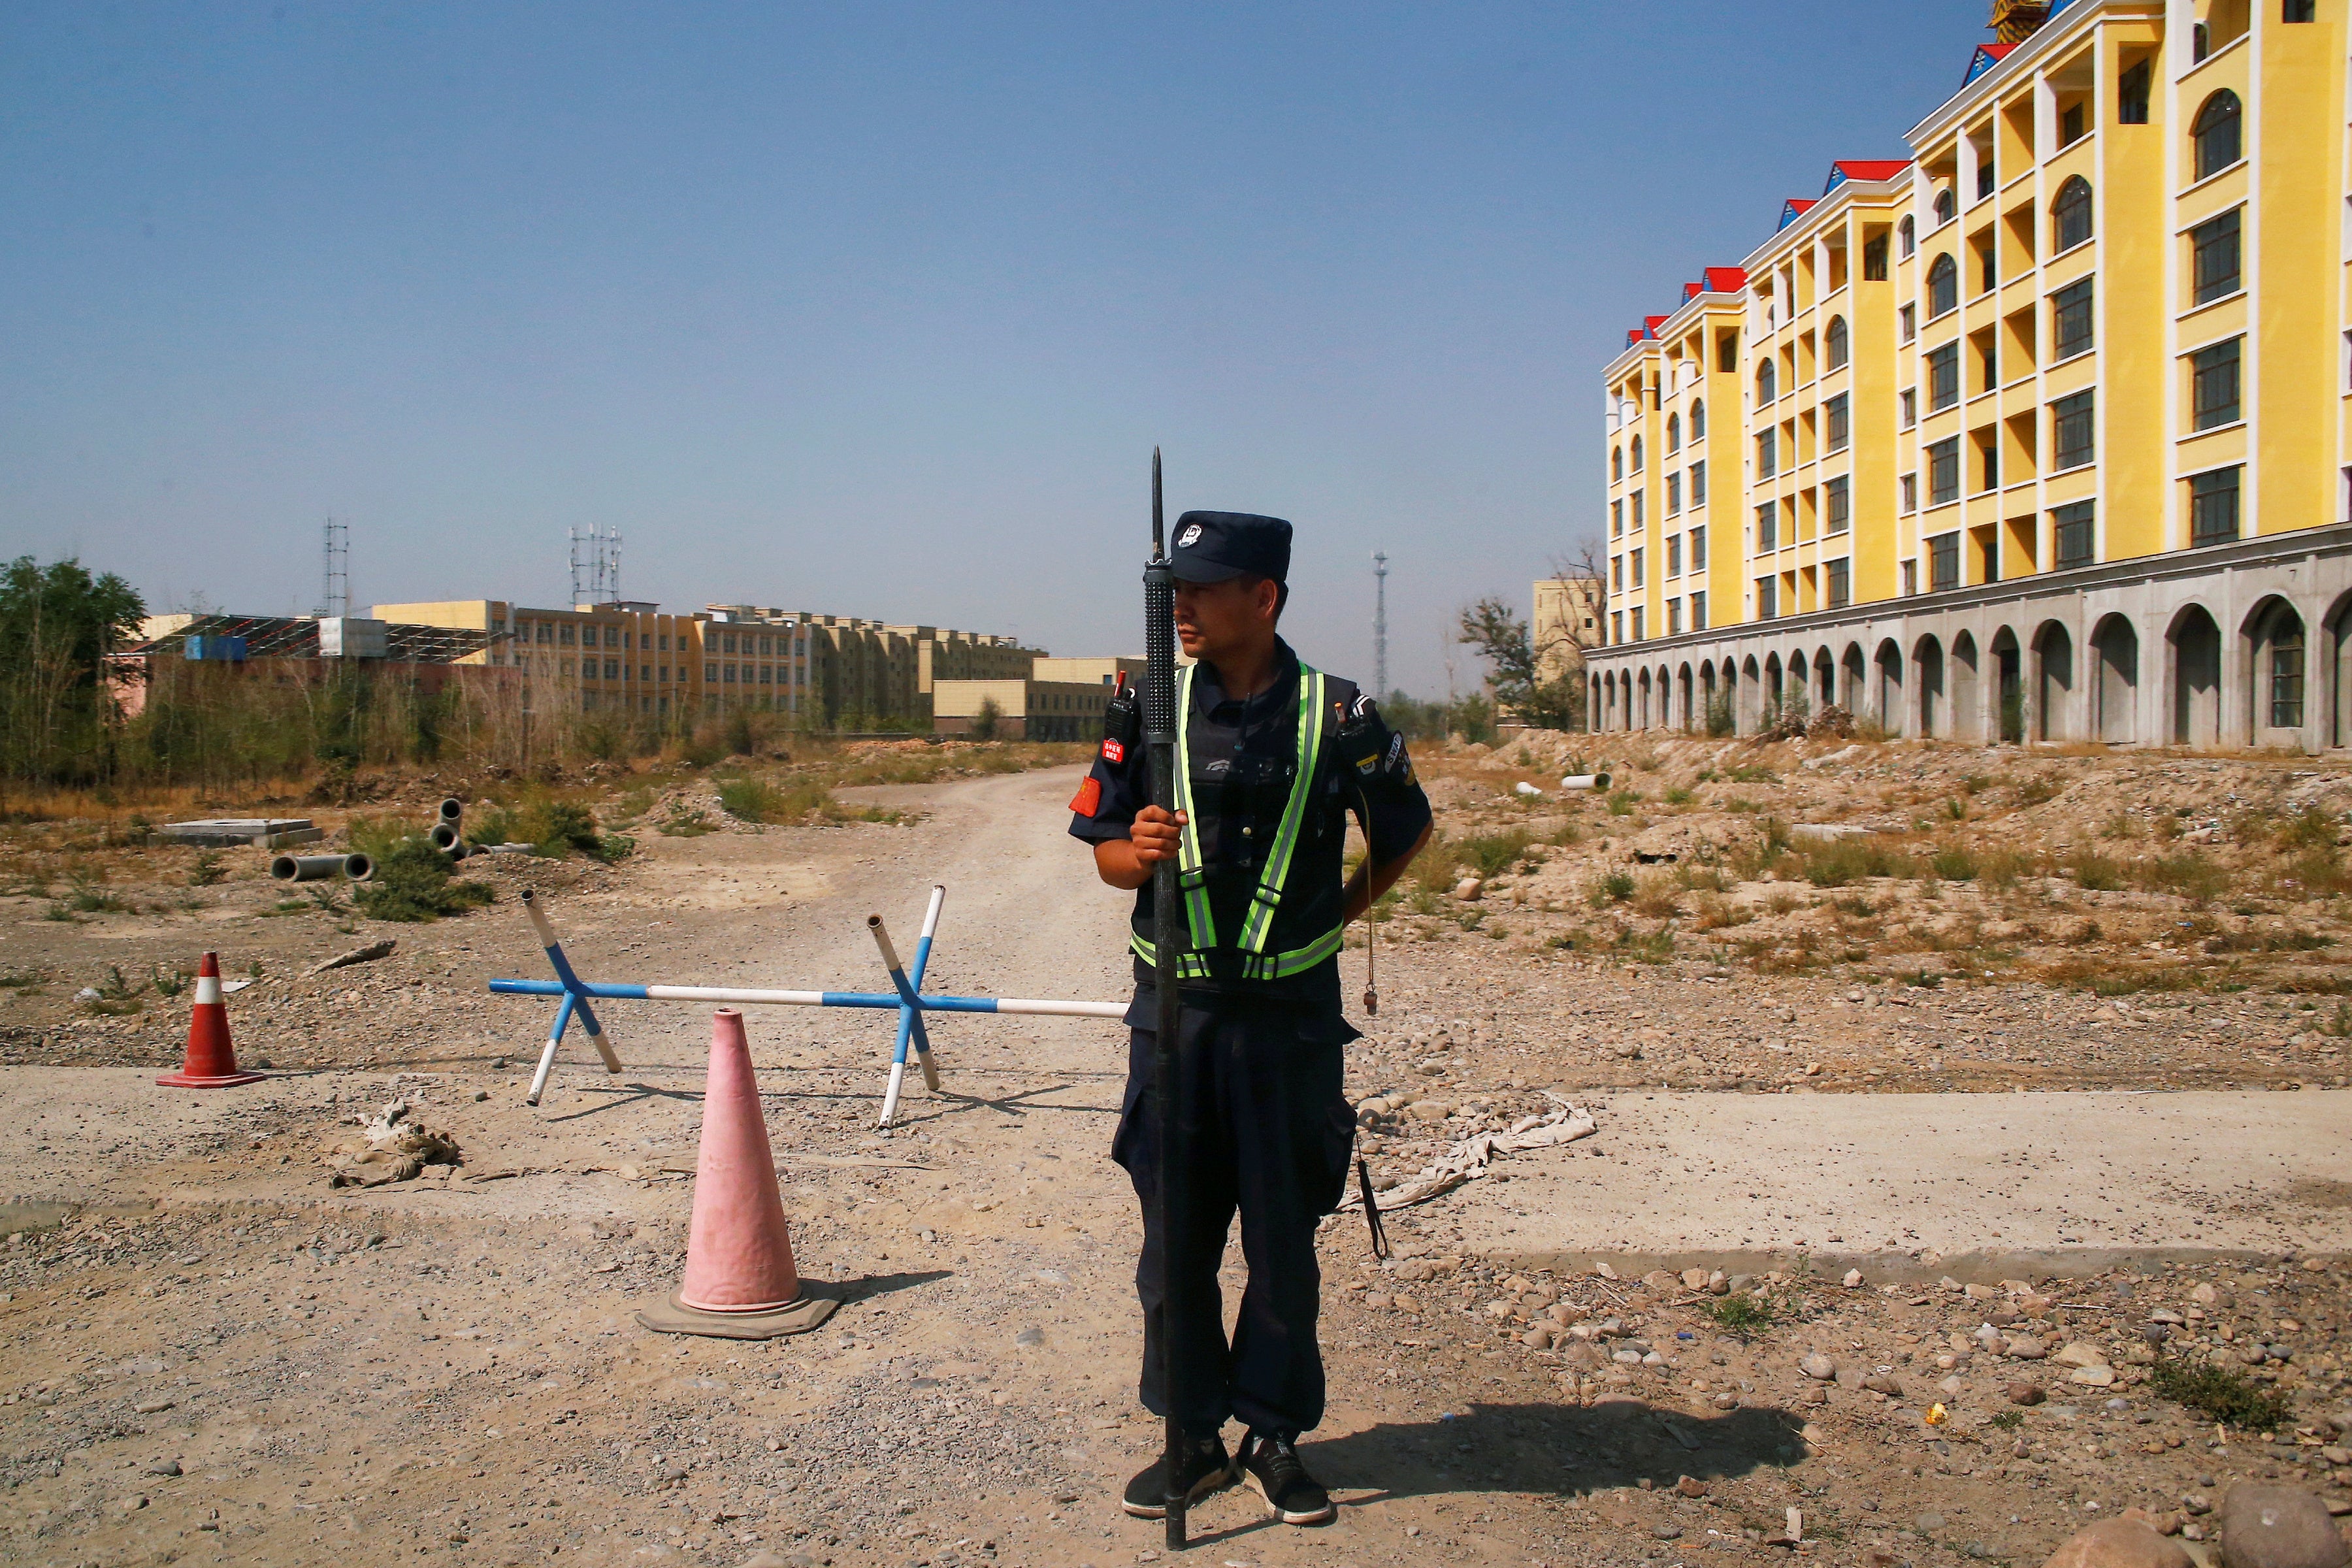 A Chinese police officer takes his position by the road near what is officially called a vocational education center in Yining in Xinjiang Uighur Autonomous Region